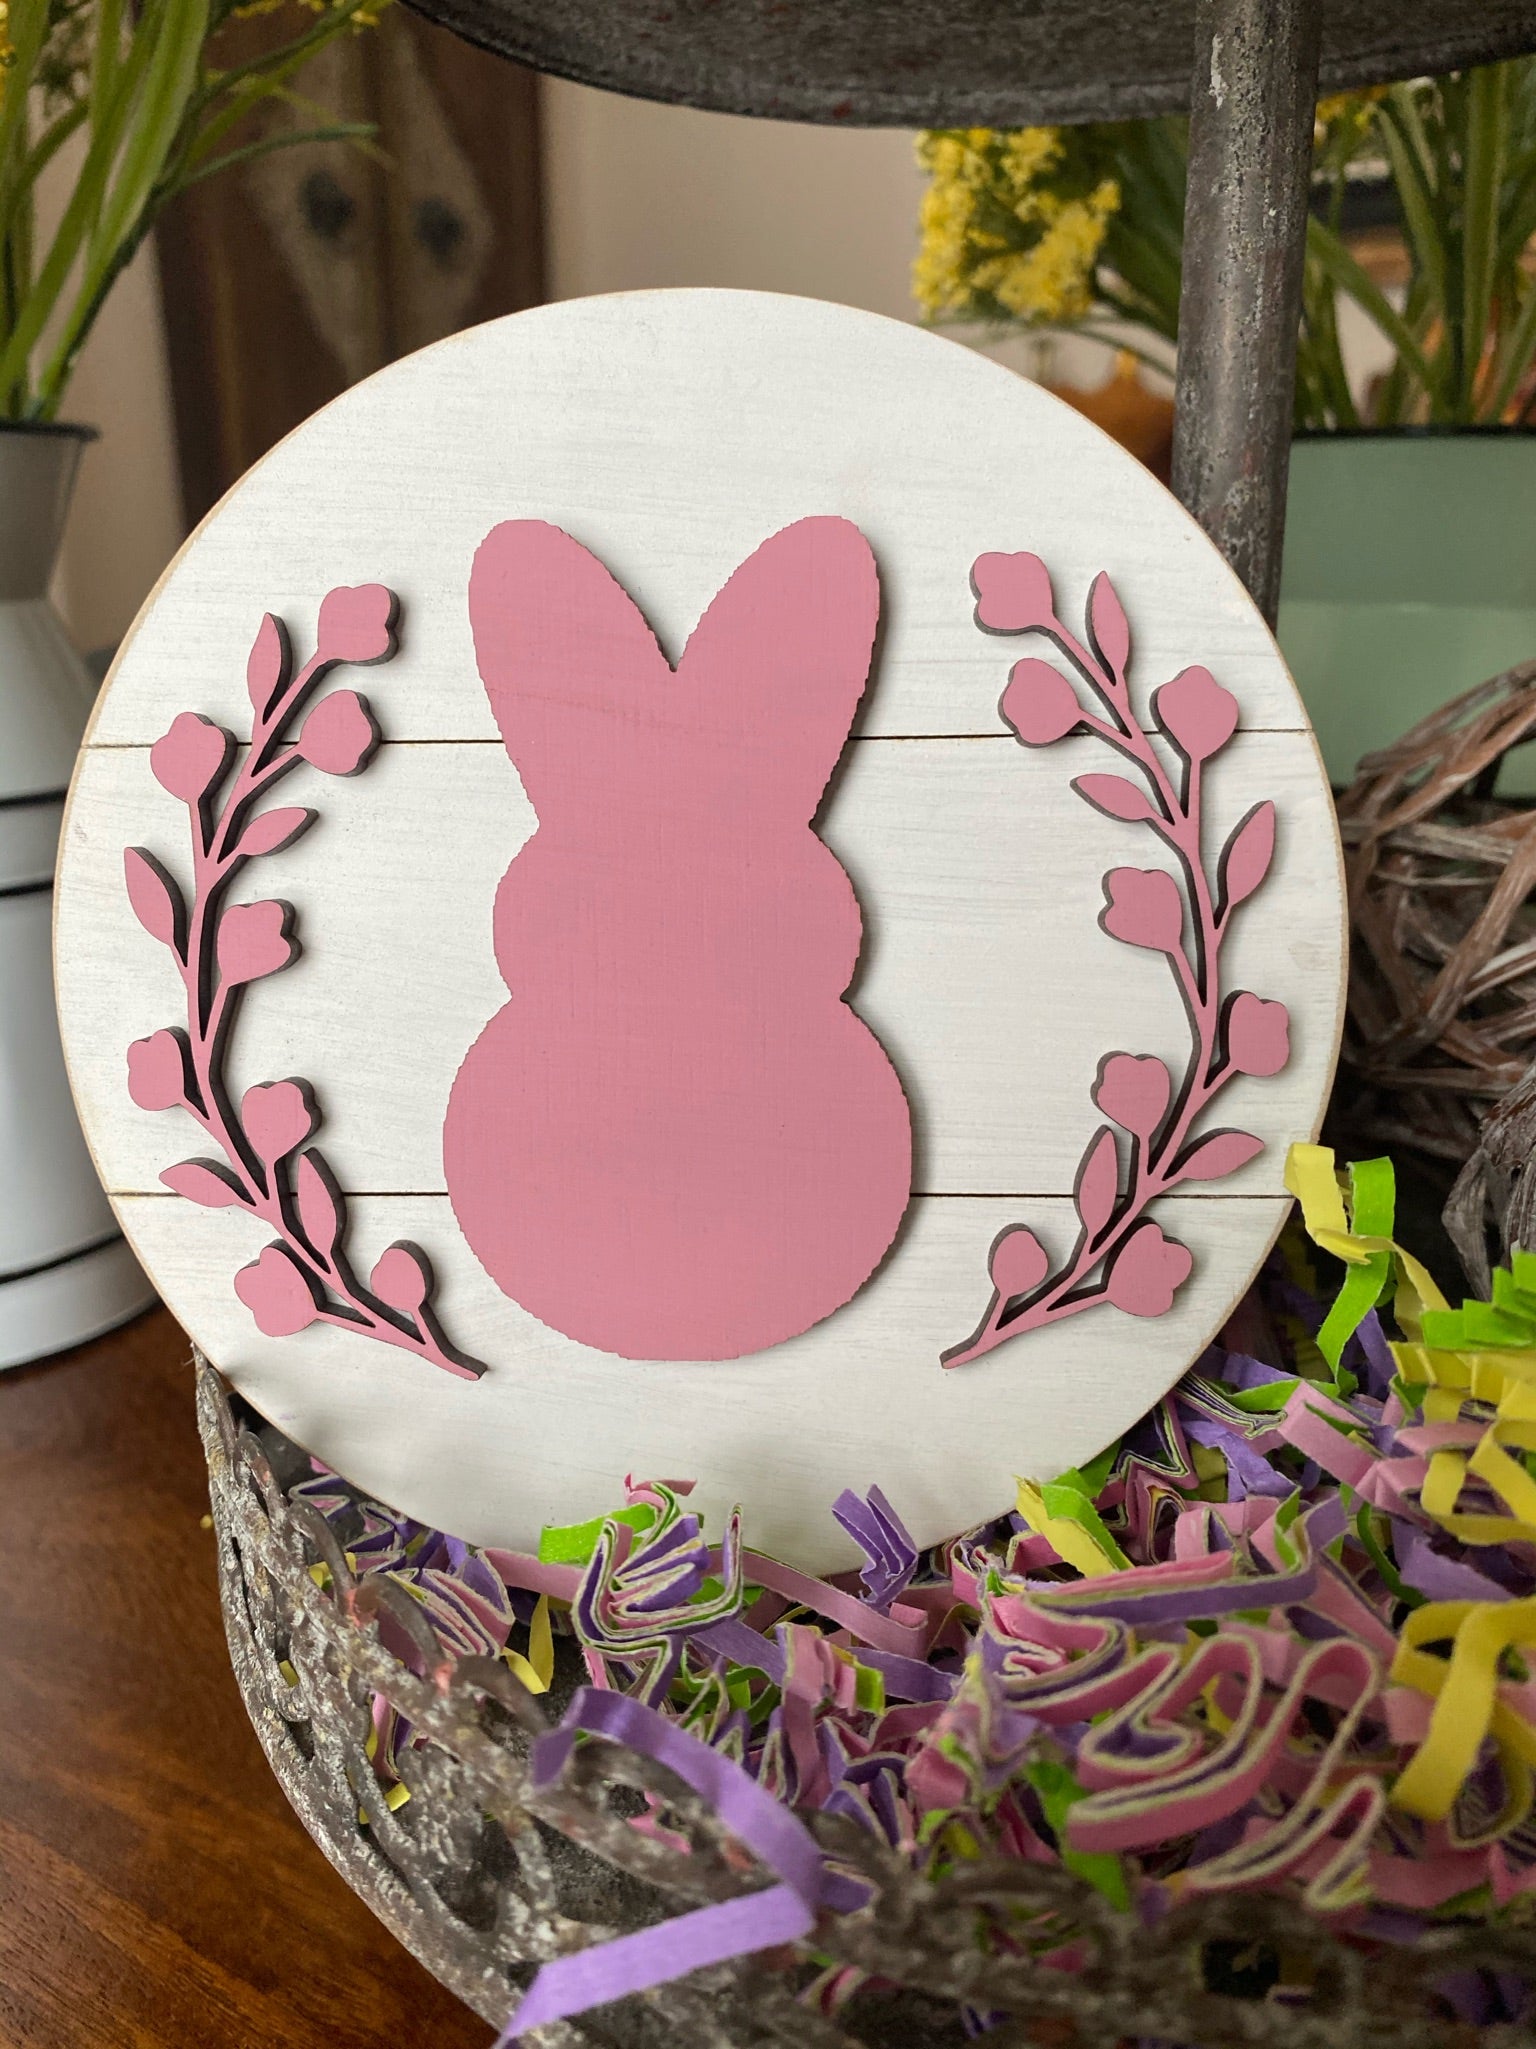 5" Round Bunny/Wreath Tiered Tray Easter Decor